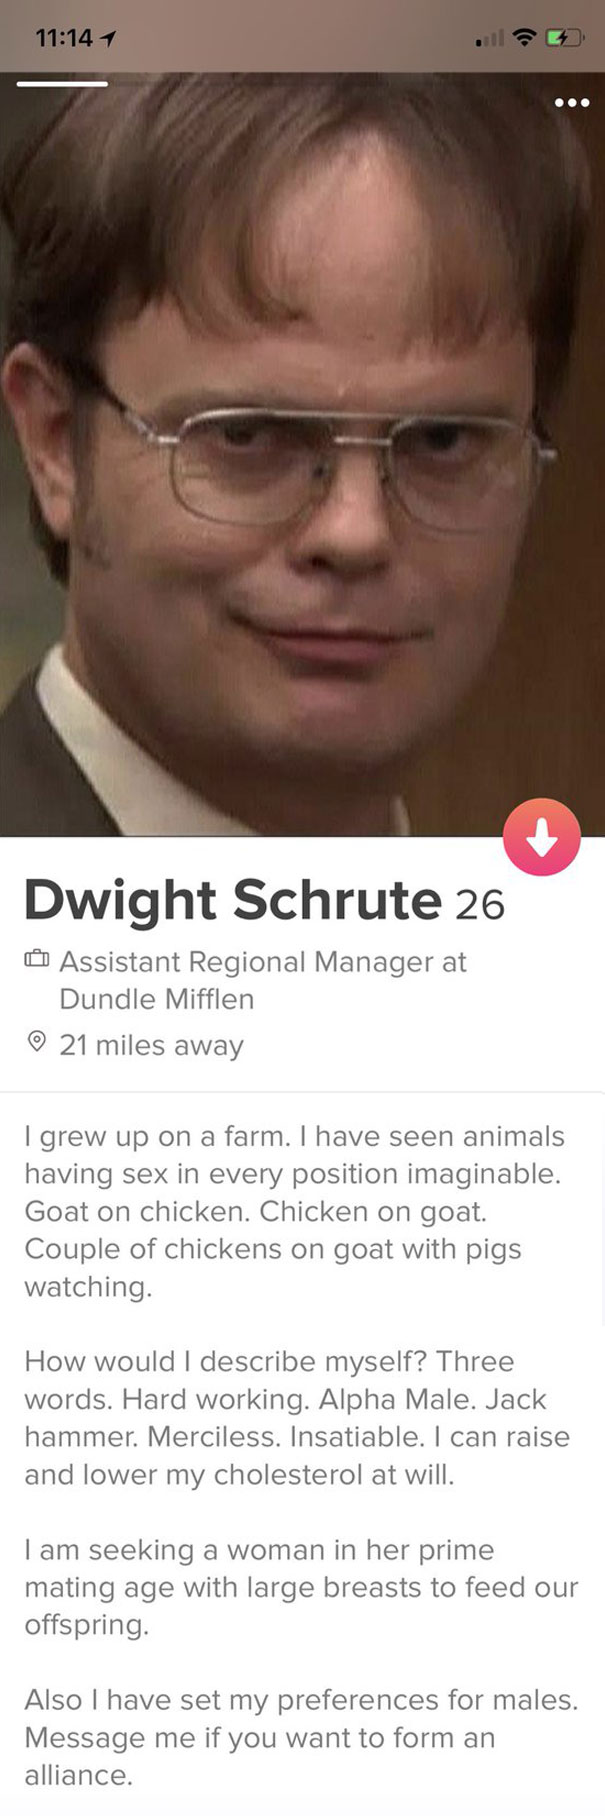 56 Funny Tinder Profiles That Will Make You Look Twice | Bored Panda